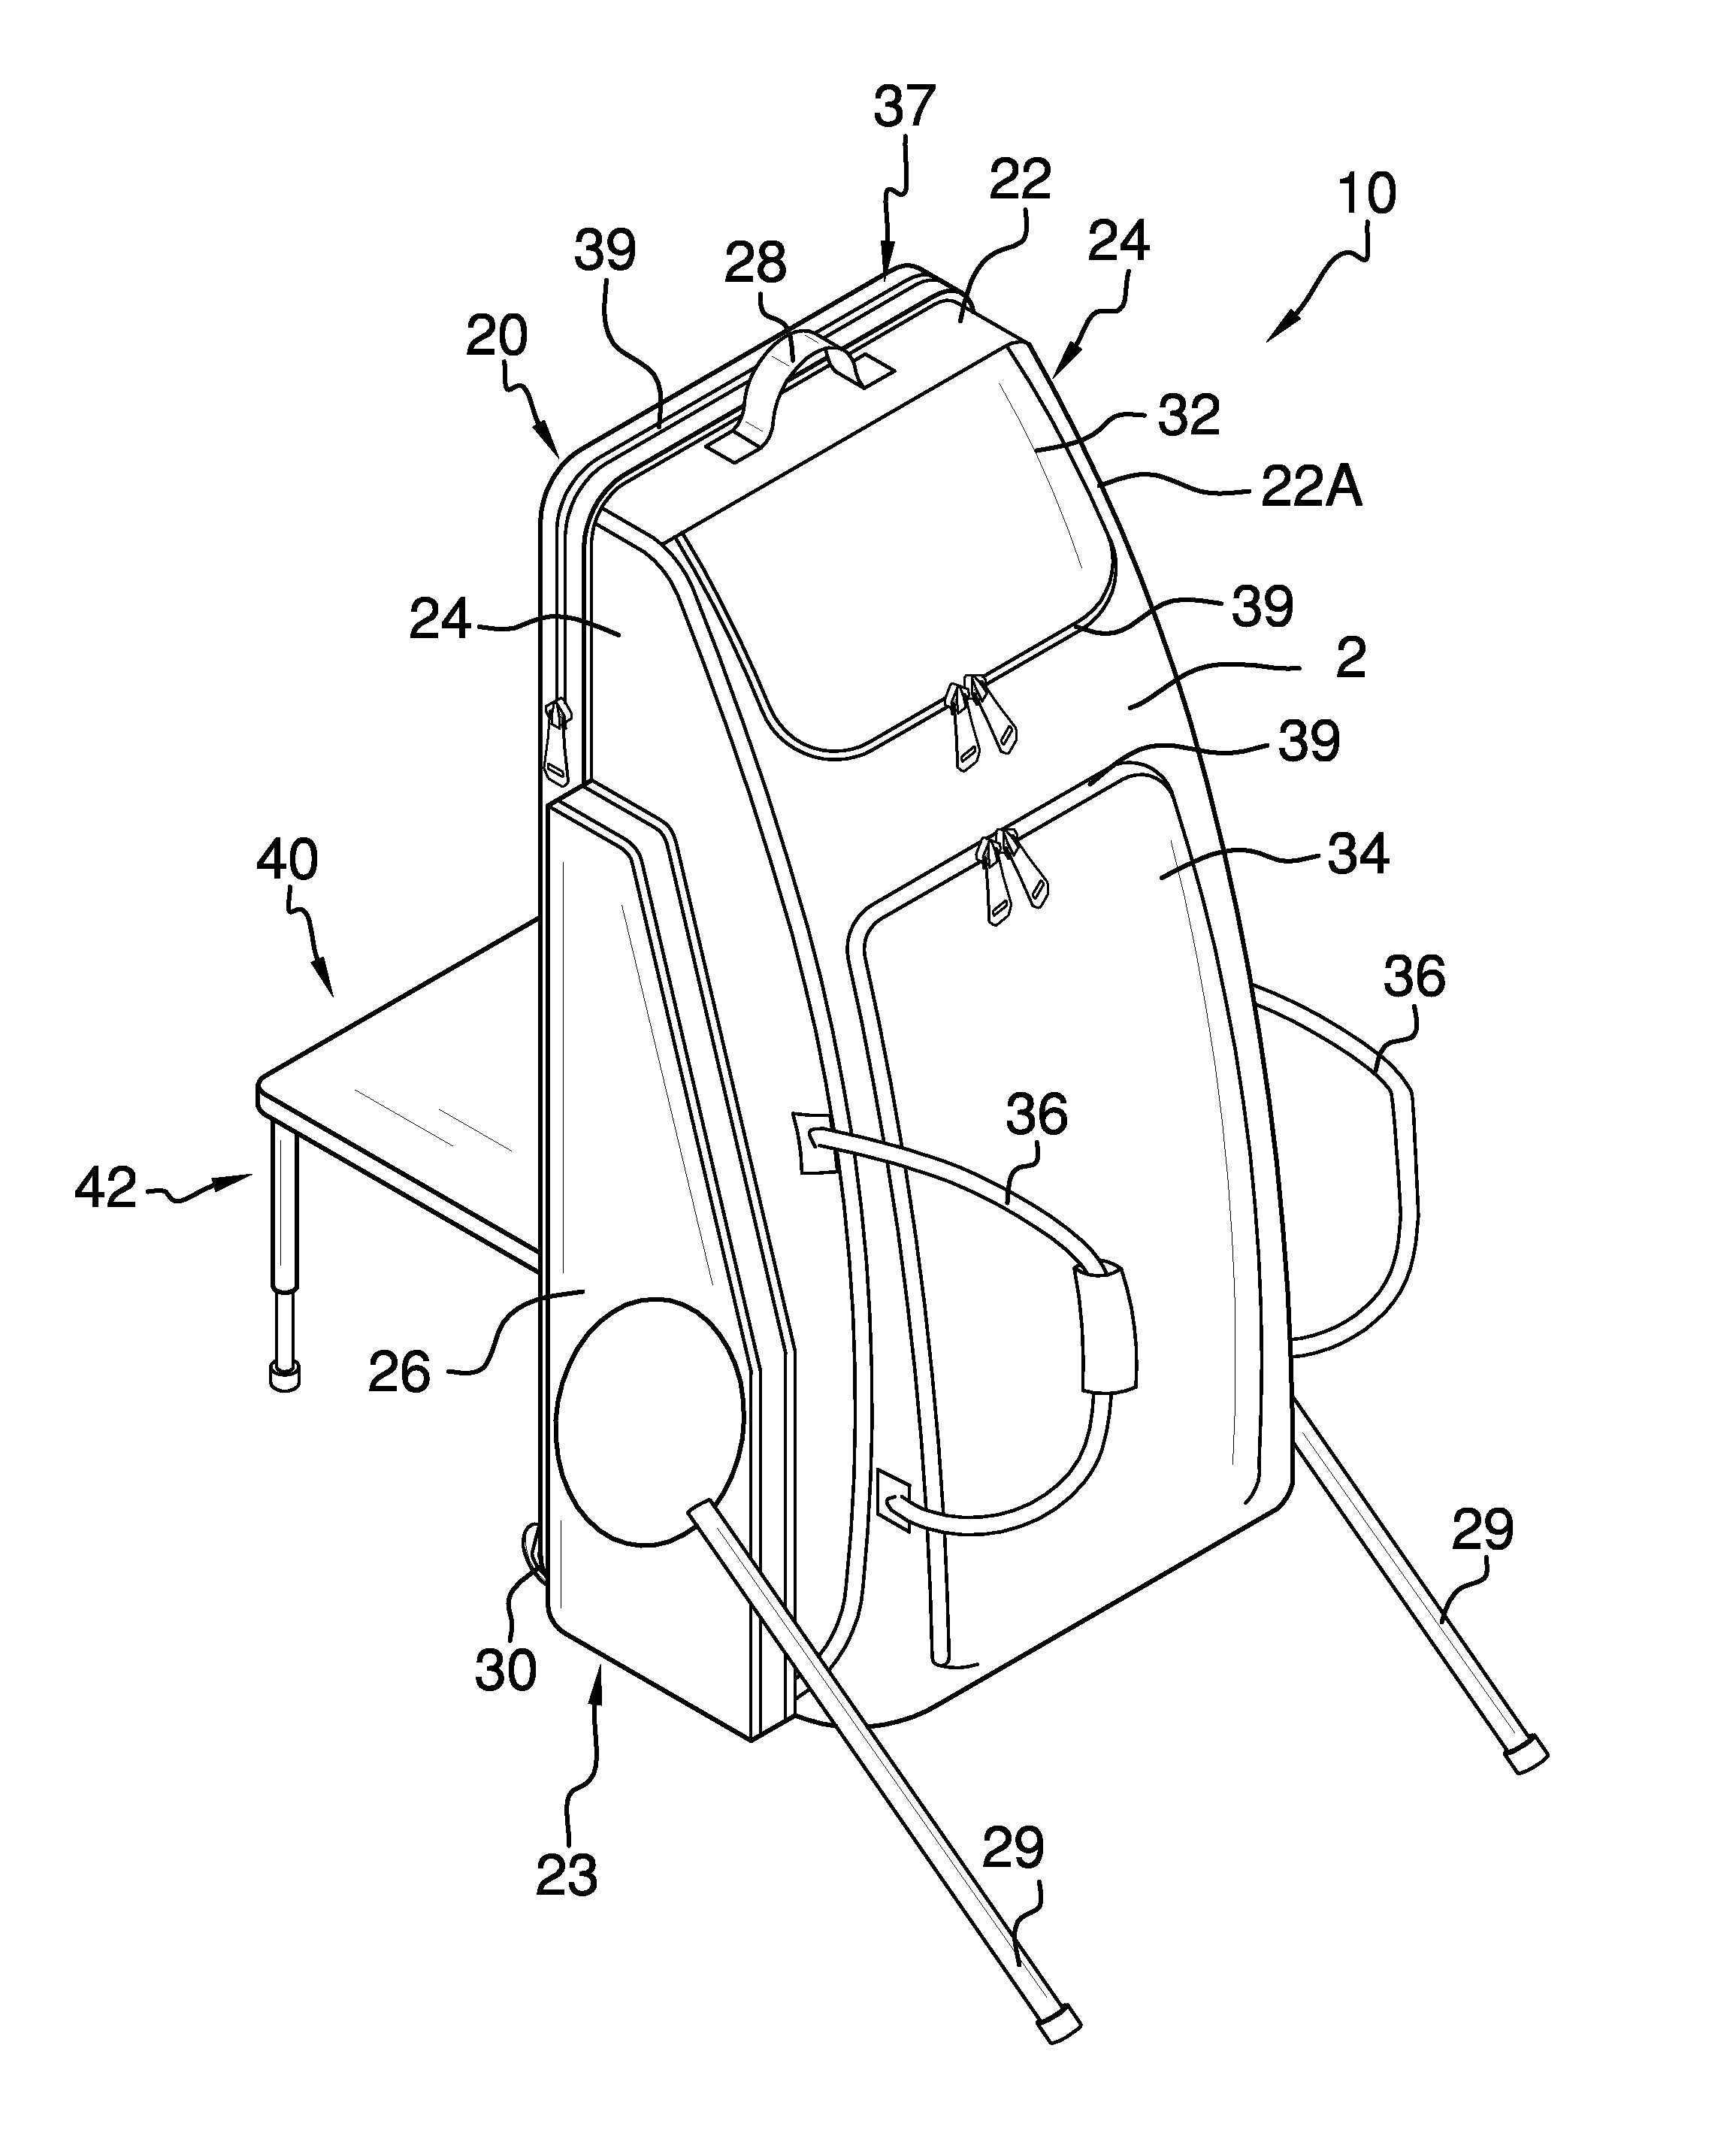 Sports bag with chair device